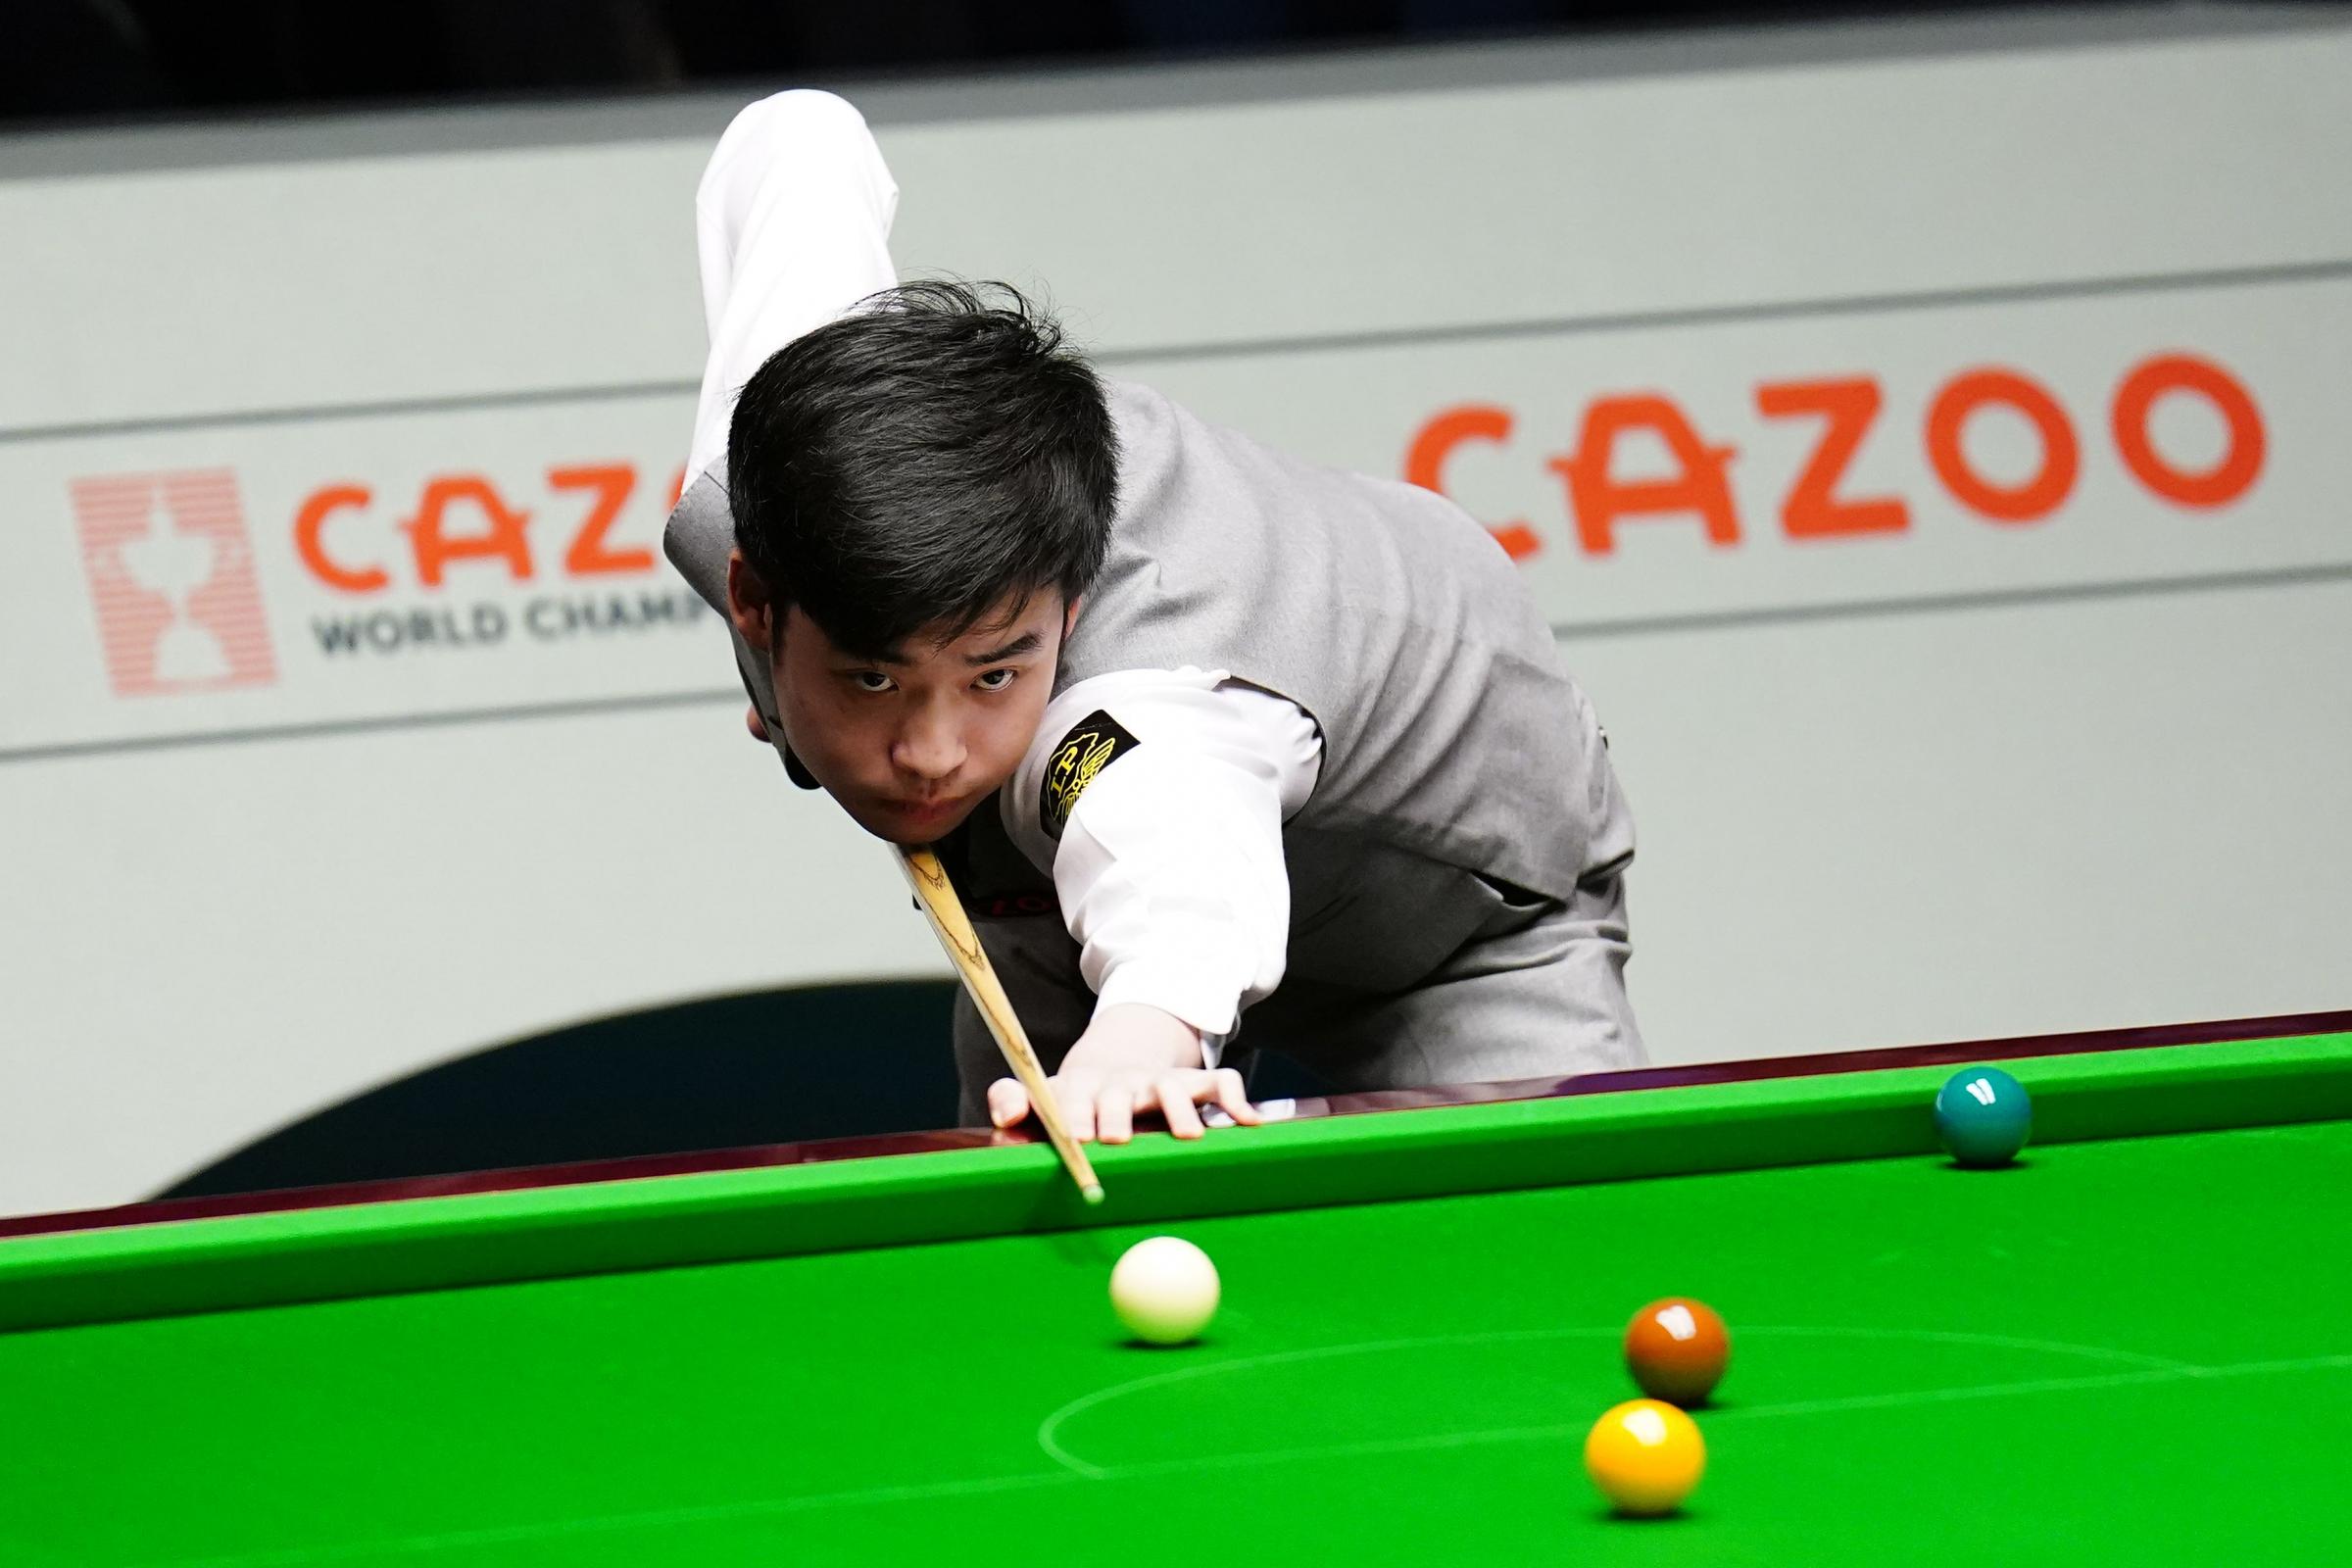 Si Jiahui leads Luca Brecel in World Championship semi after opening session Daily Echo